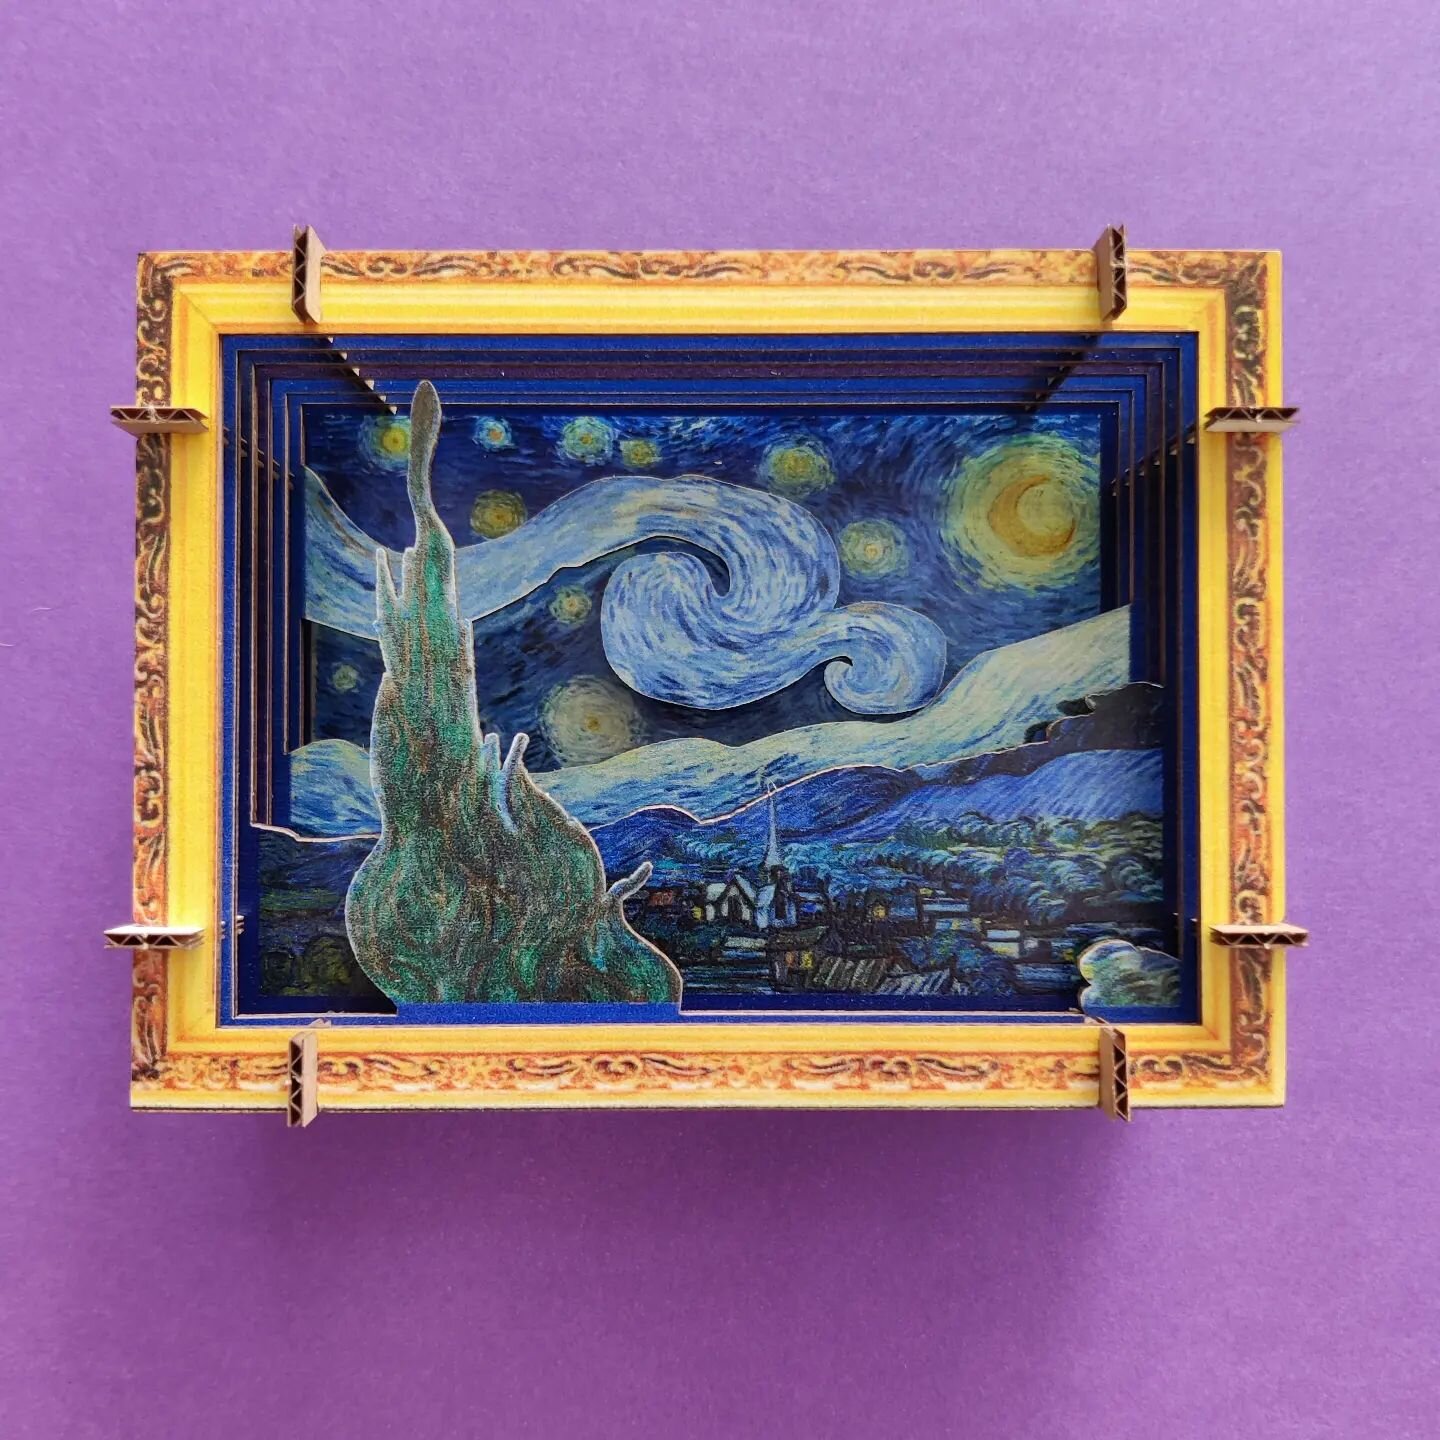 Our 3D reimagination of Starry Night by Vincent Van Gogh.

8 laser of cardboard meticulously laser cut and printed on right here in our New Orleans studio.

Available now